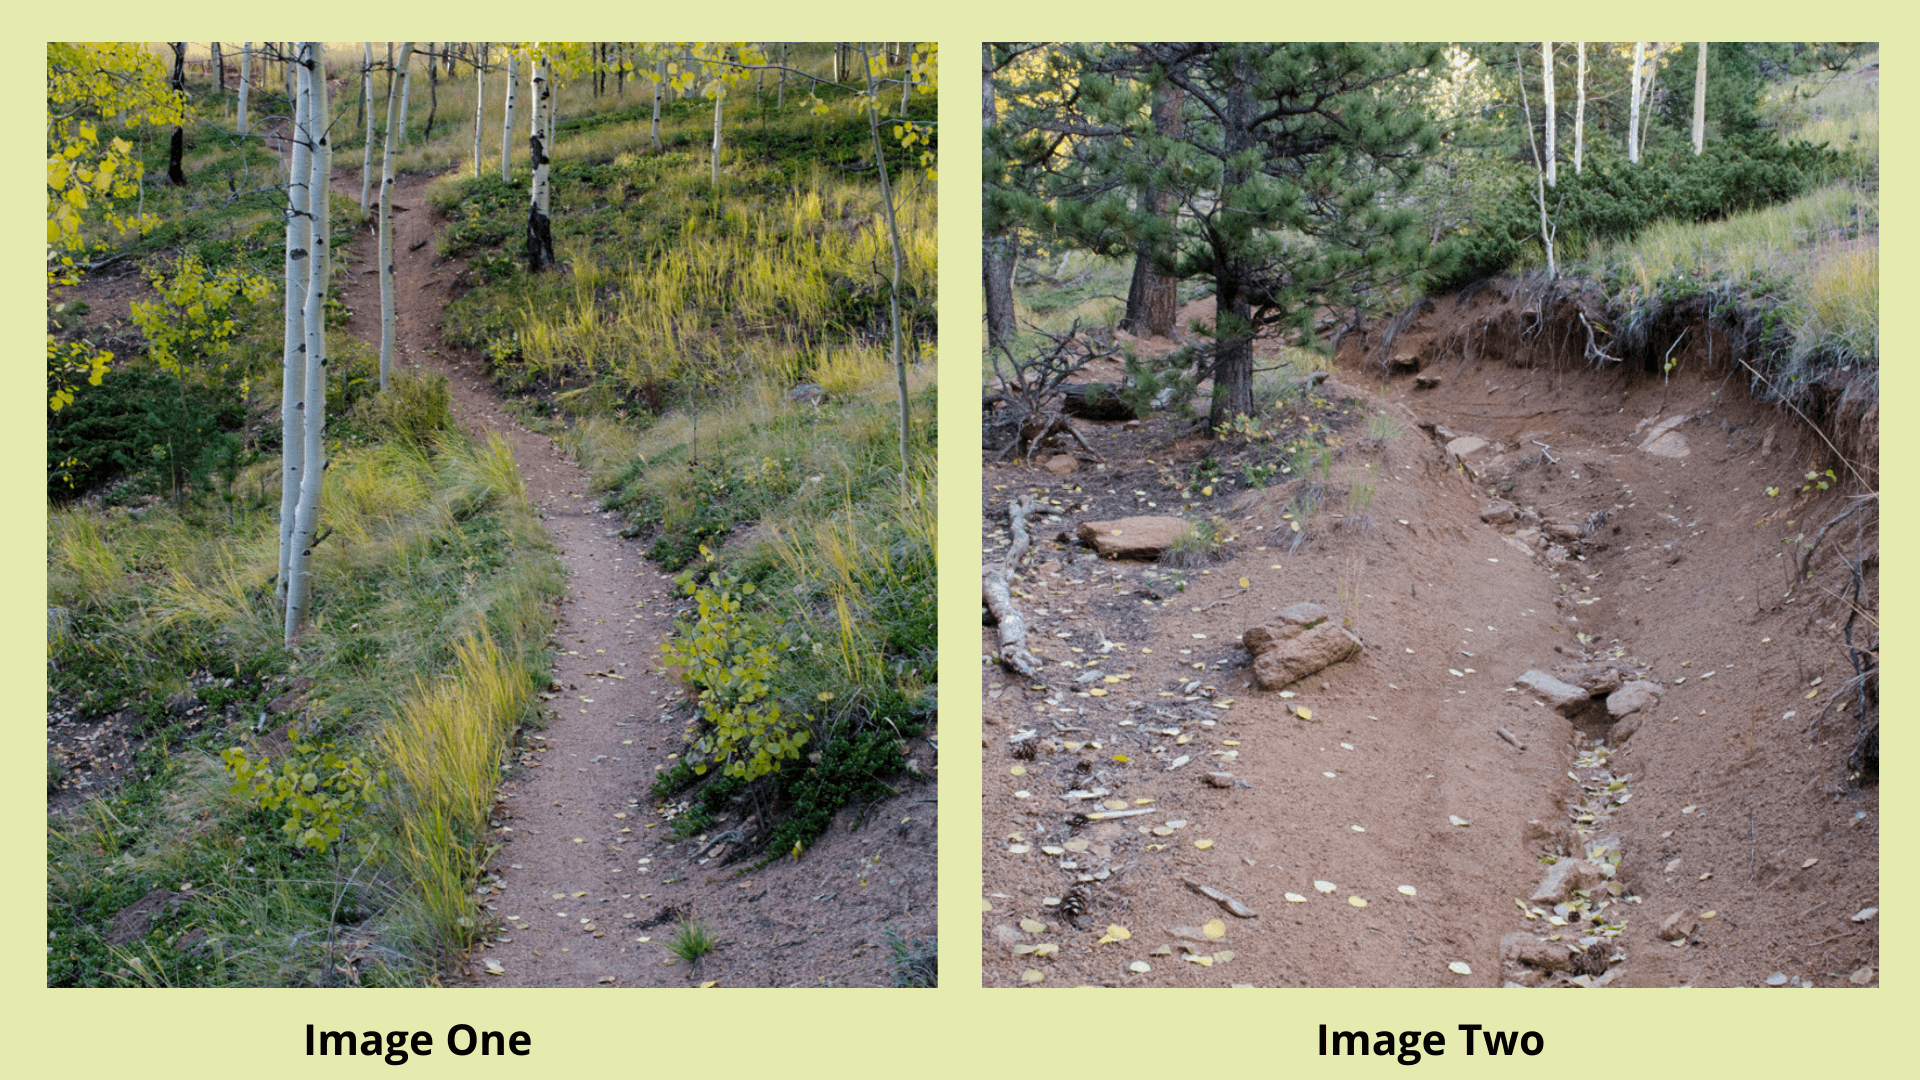 Image One: A trail that feels alive because it resolves all of the forces in its context, including erosion. Erosion is limited by frequent crests and dips in the trail alignment that cause water to fall off of the trail in the dips while forming natural shape in 3D. This trail needs very little maintenance.Image Two: This trail lacks dips for drainage. As a result, the trail suffers major erosion as water runs down it. This trail is being destroyed in the short run. It feels dead because it doesn’t resolve erosion as a force.